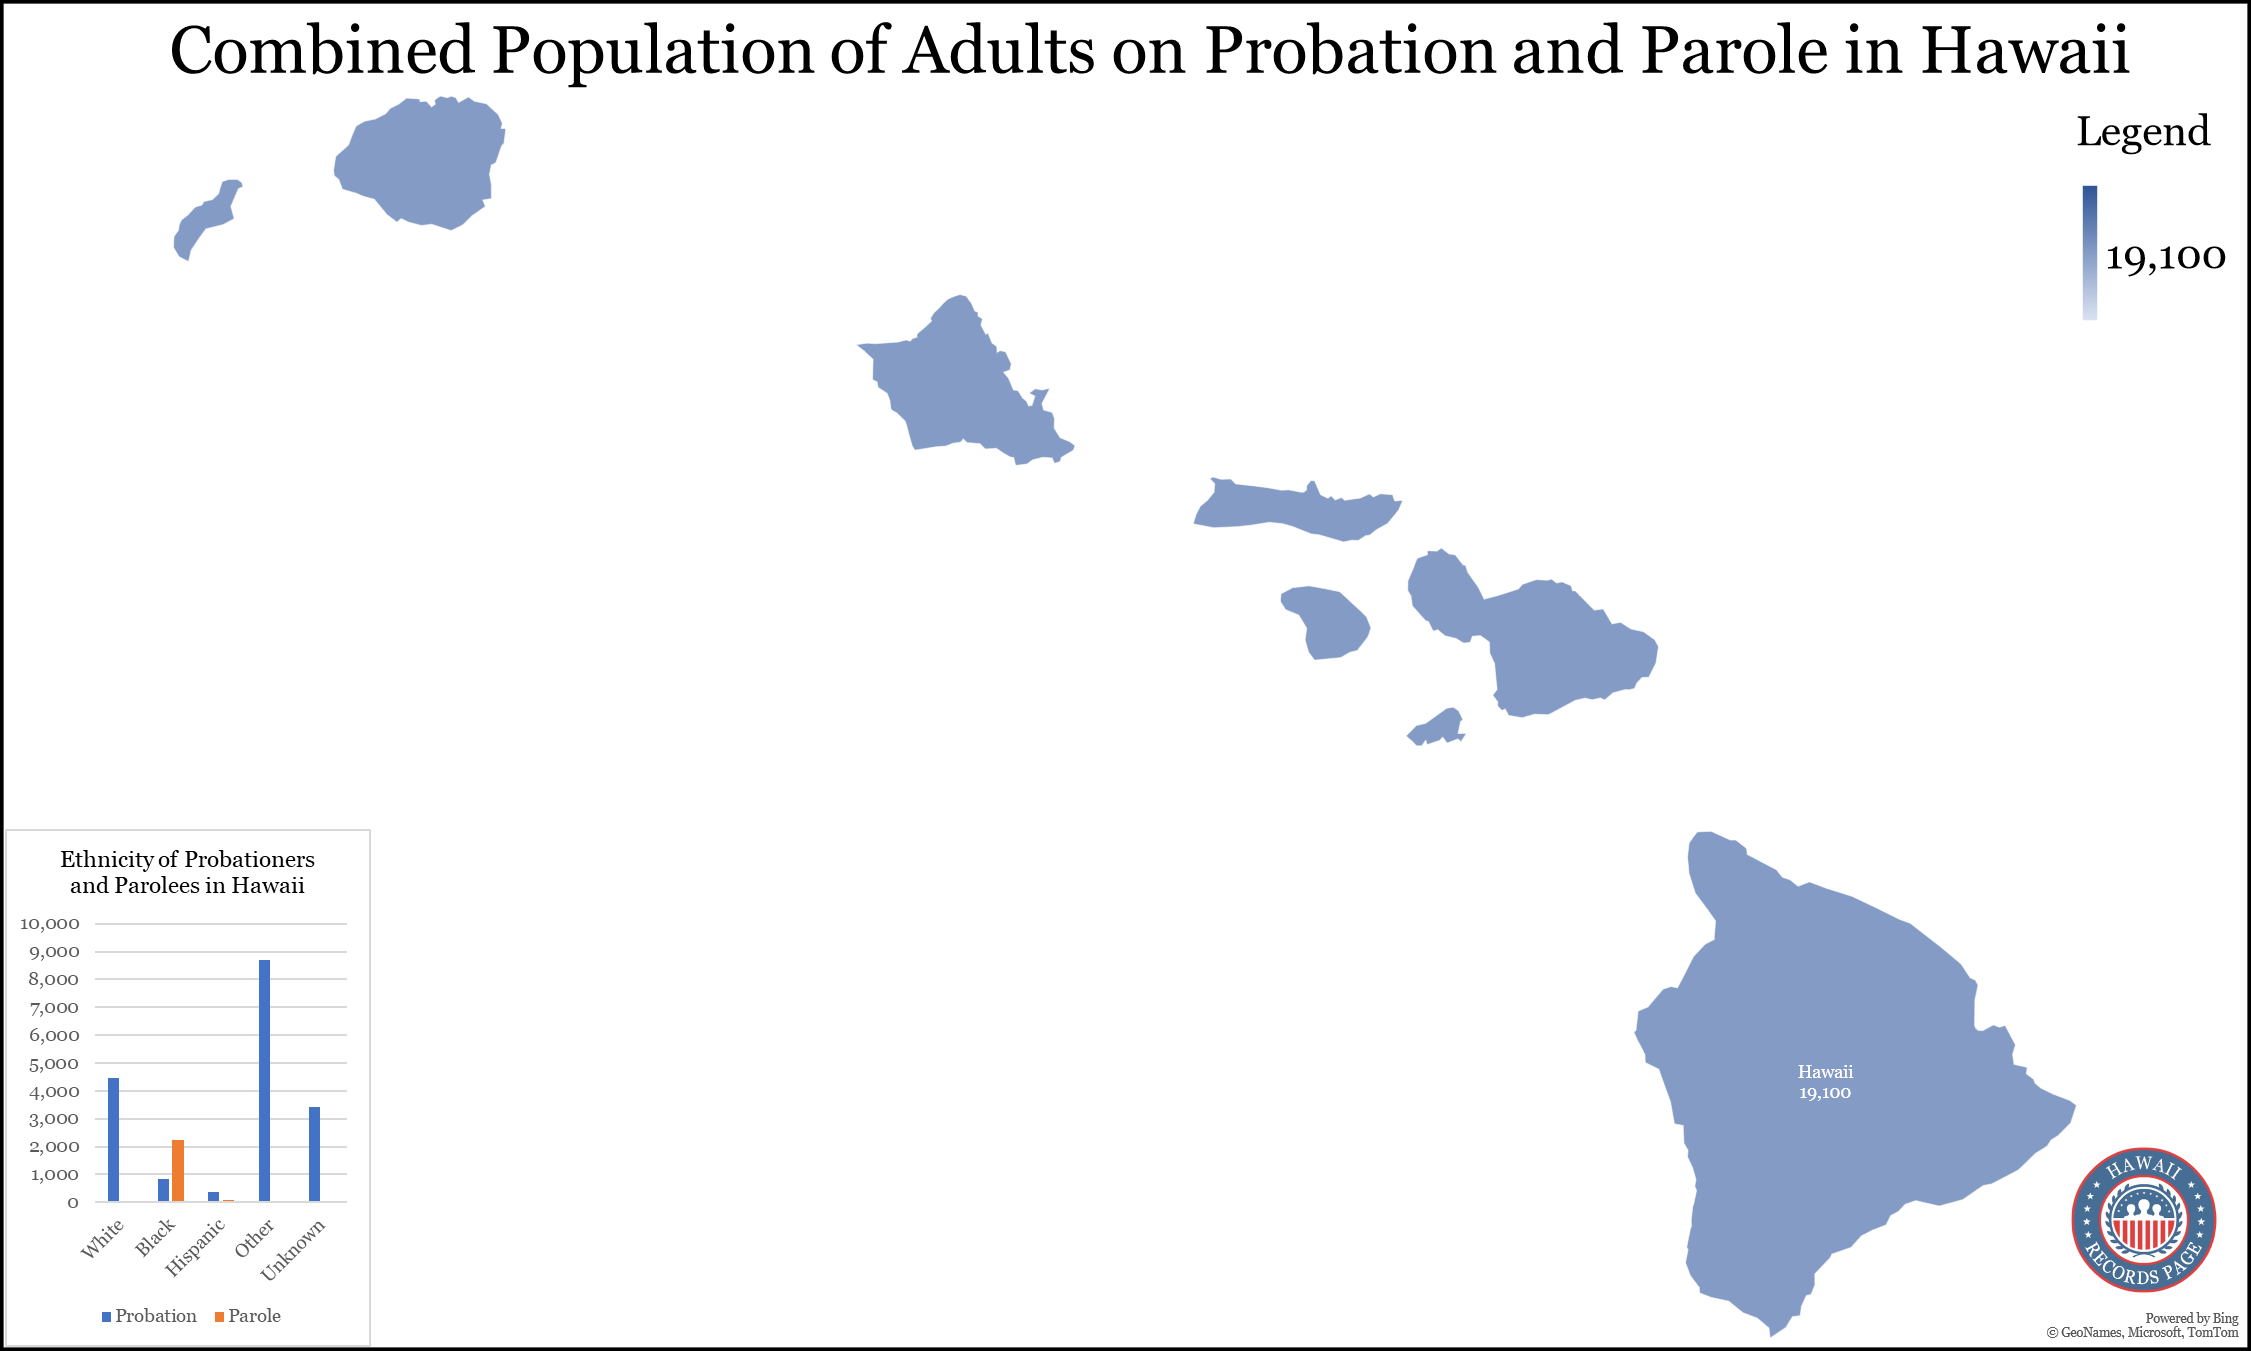 An outline of the State of Hawaii map with a total population of 19100 adults on probation and parole; a bar graph showing the ethnic breakdown of the probationers and parolees, with categories for white, black, Hispanic, other, and unknown; and the website's logo in the bottom left corner.